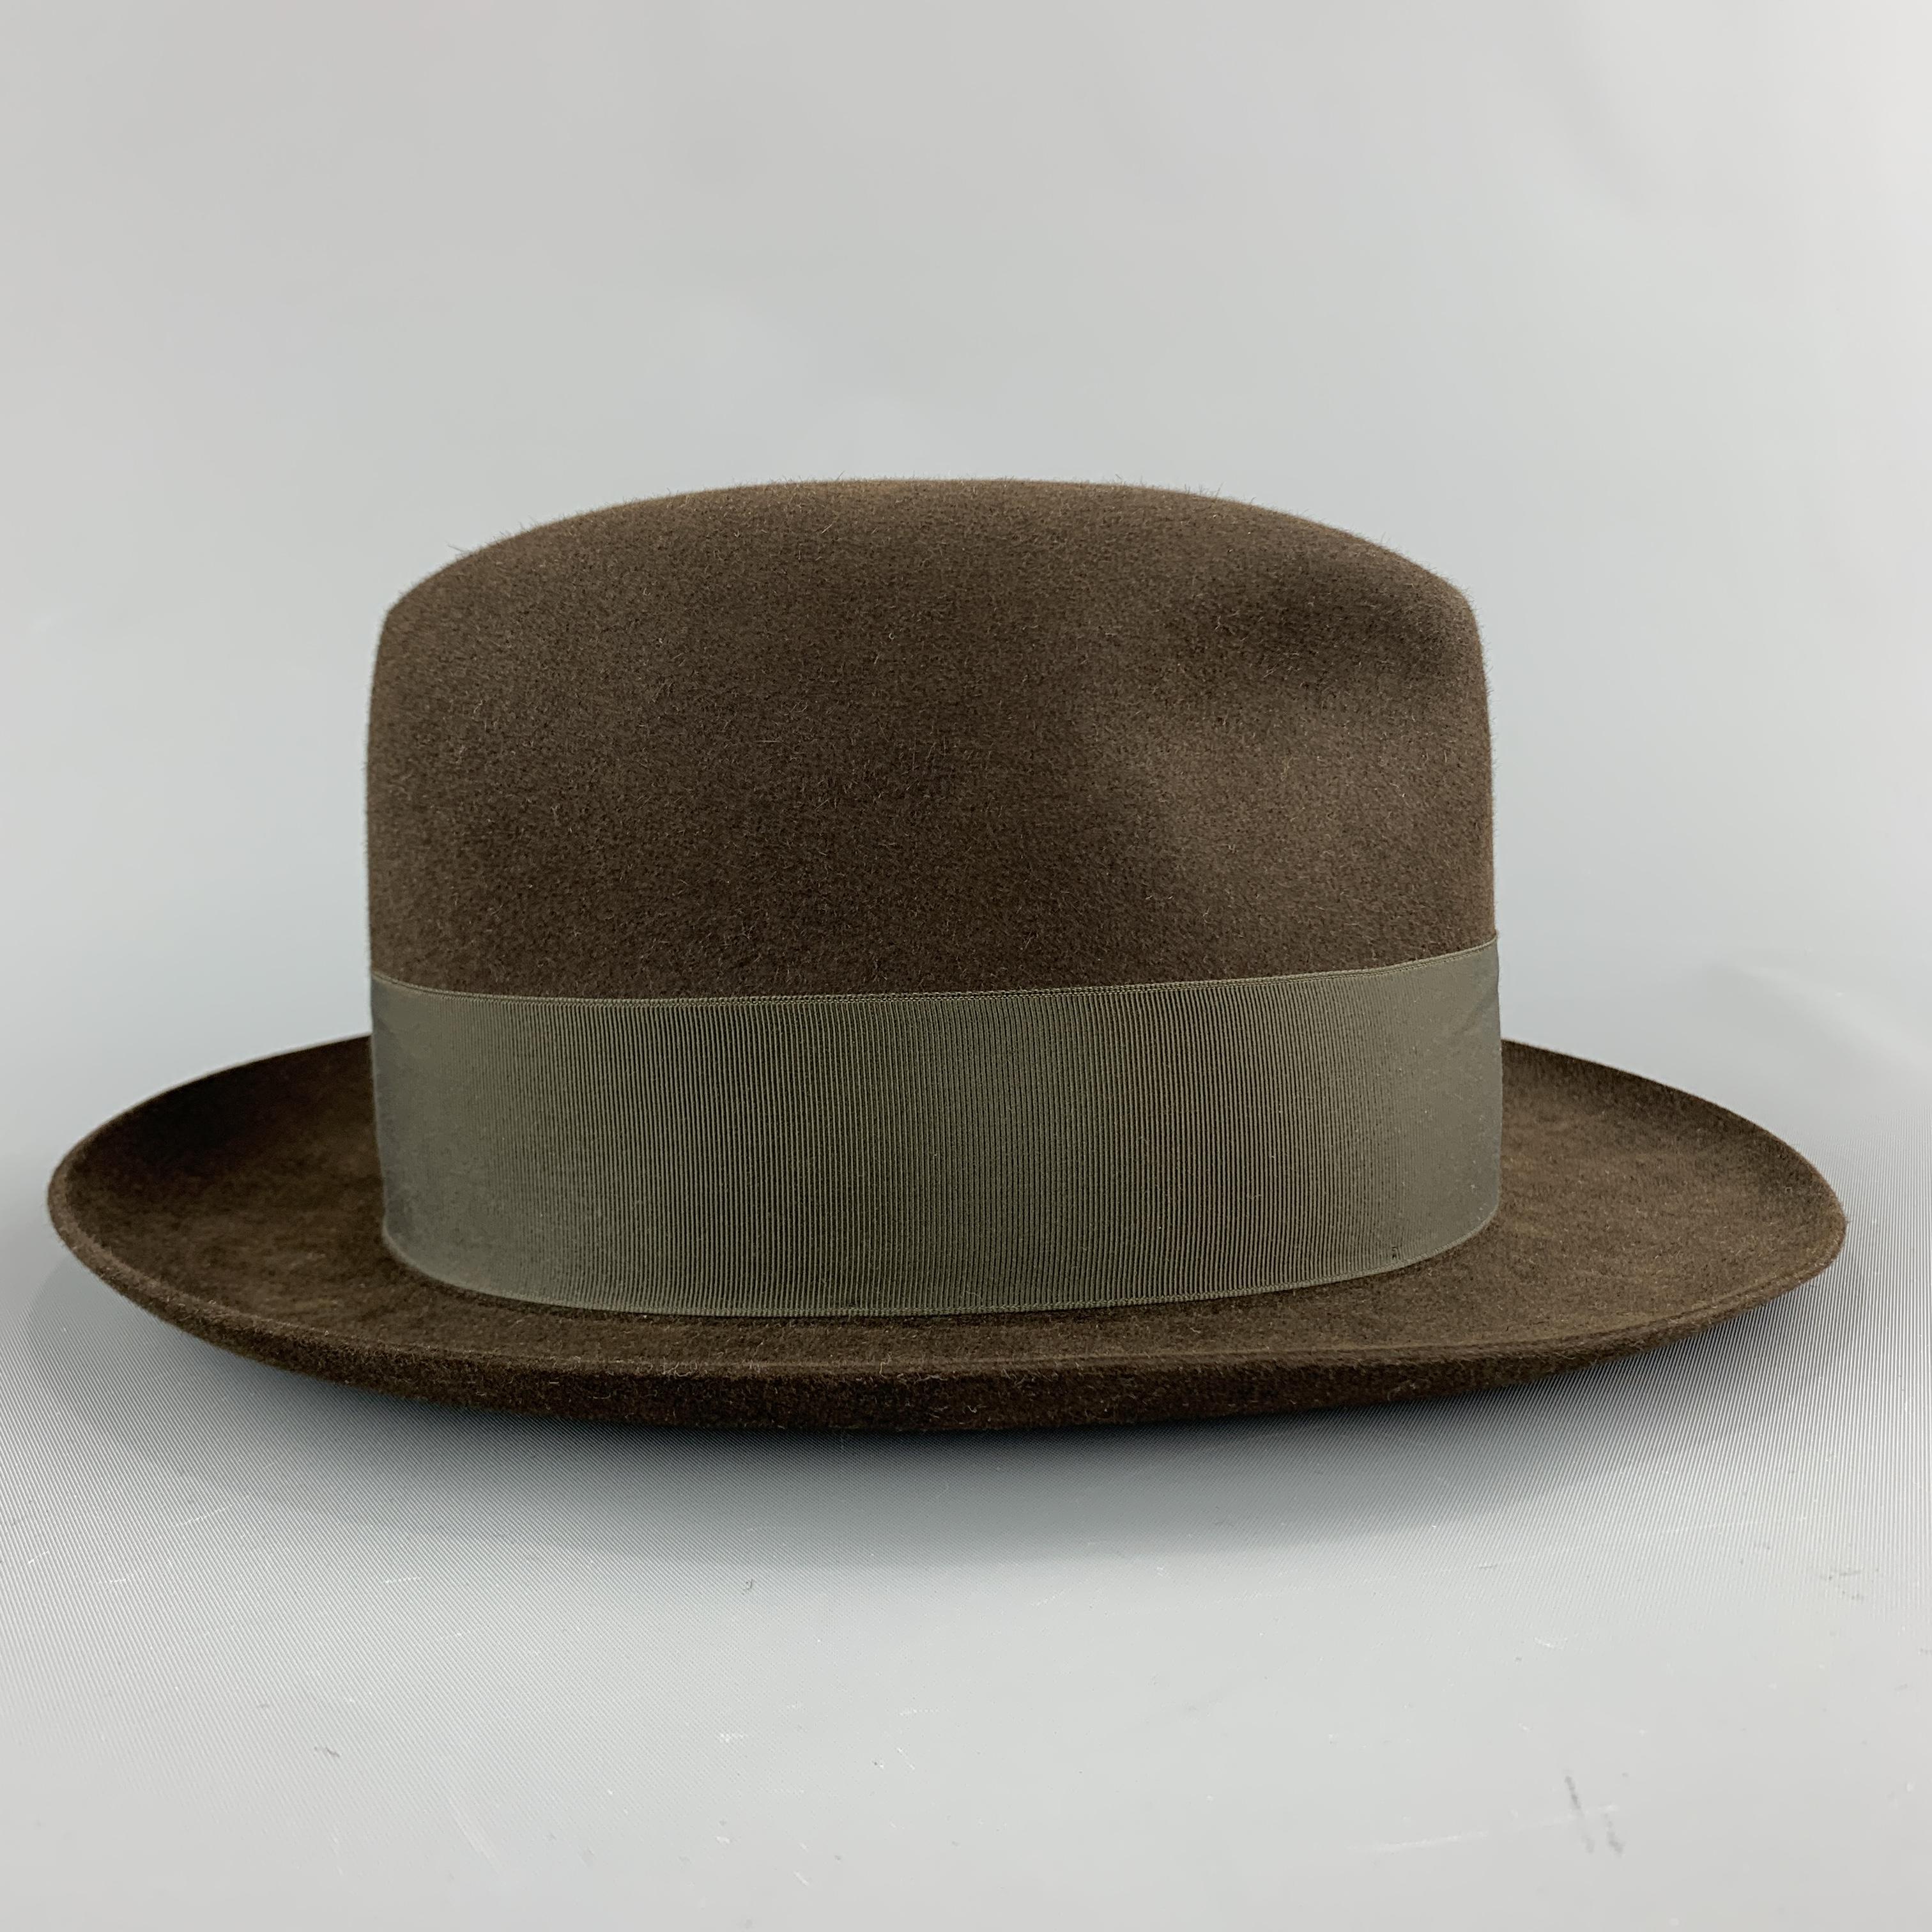 HERBERT JOHNSON fedora comes in olive green tone brown felt with thick grosgrain ribbon bow trim. Made in England.

Excellent Pre-Owned Condition.
Marked: 7 1/8 58 

Measurements:

Opening: 24 in.
Brim: 2.25 in.
Height: 5 in.